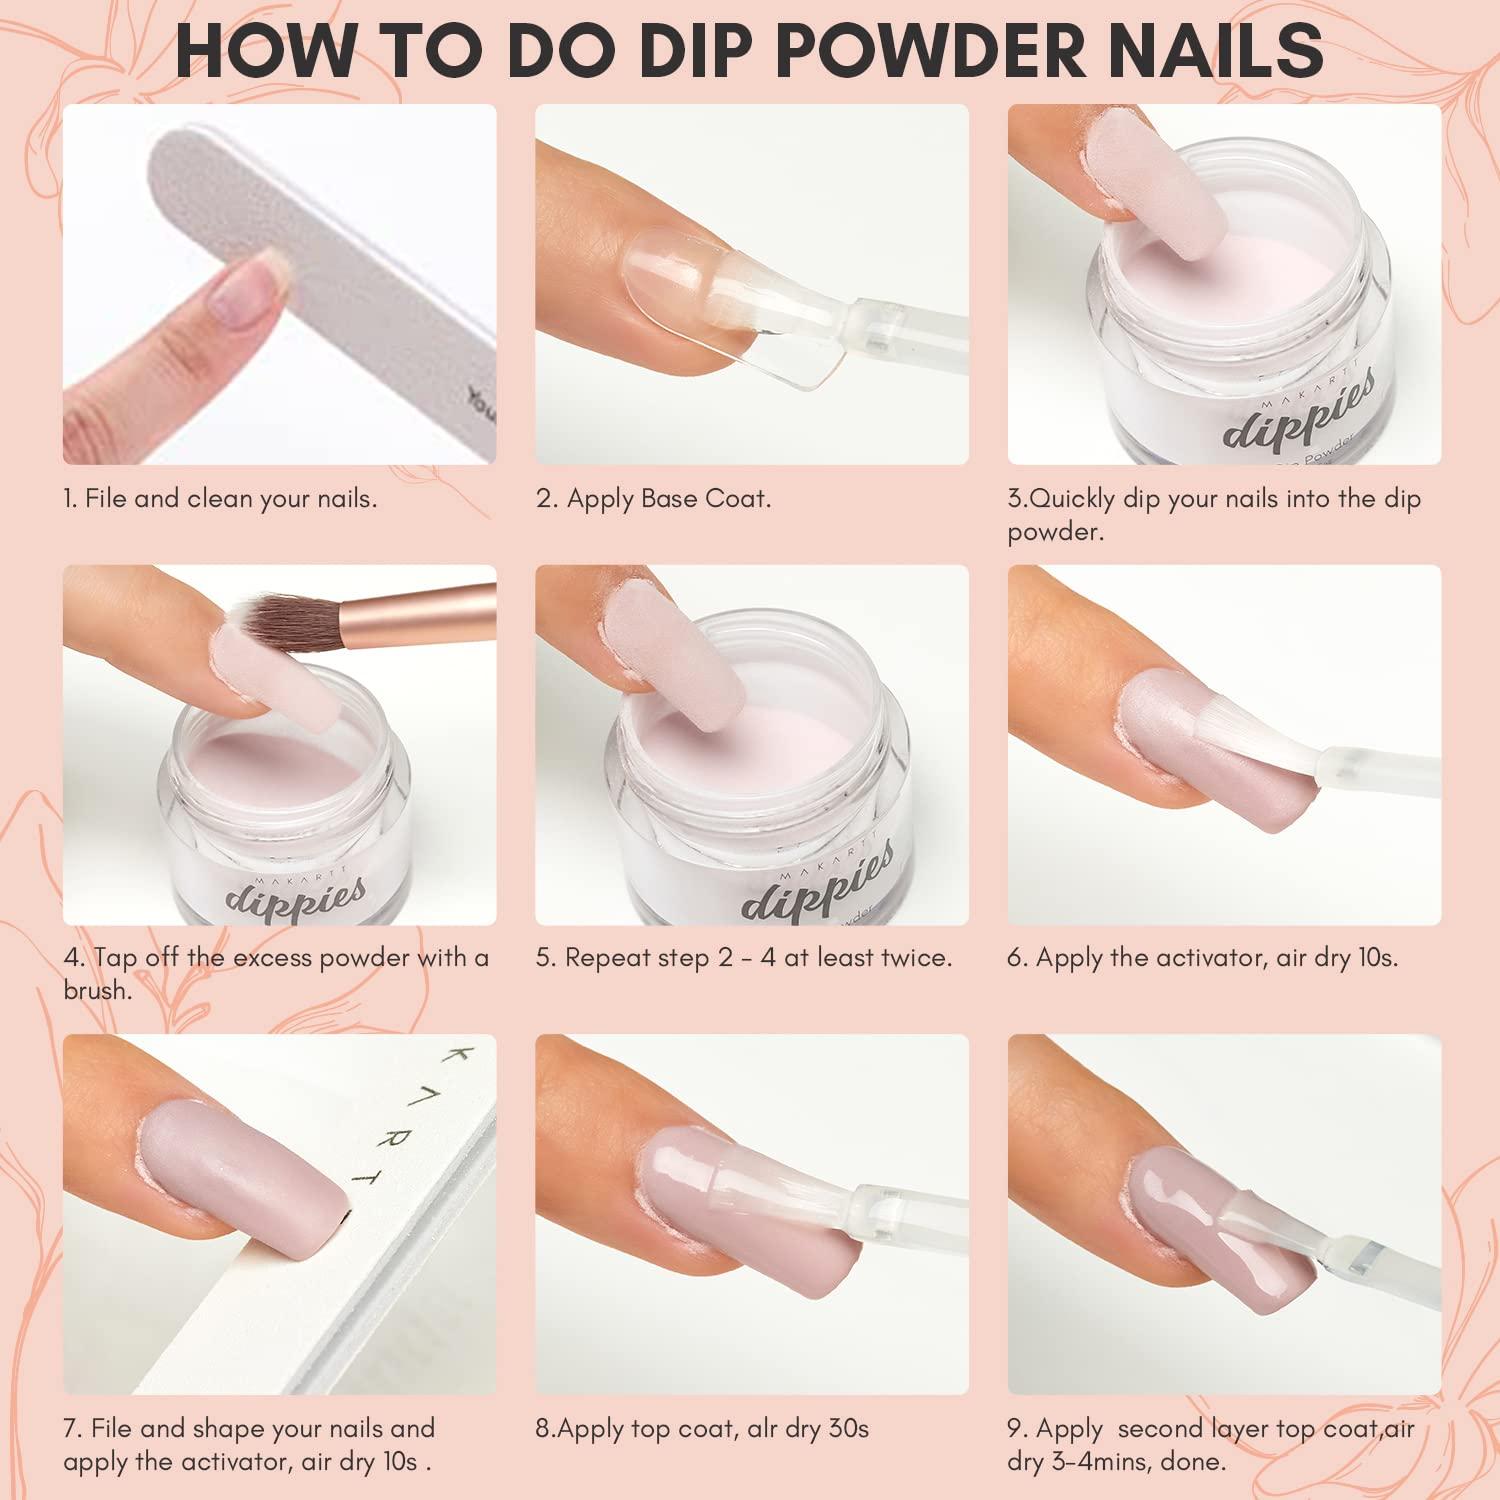 How to Apply Dip Powder Nails at Home, The Easy Way!